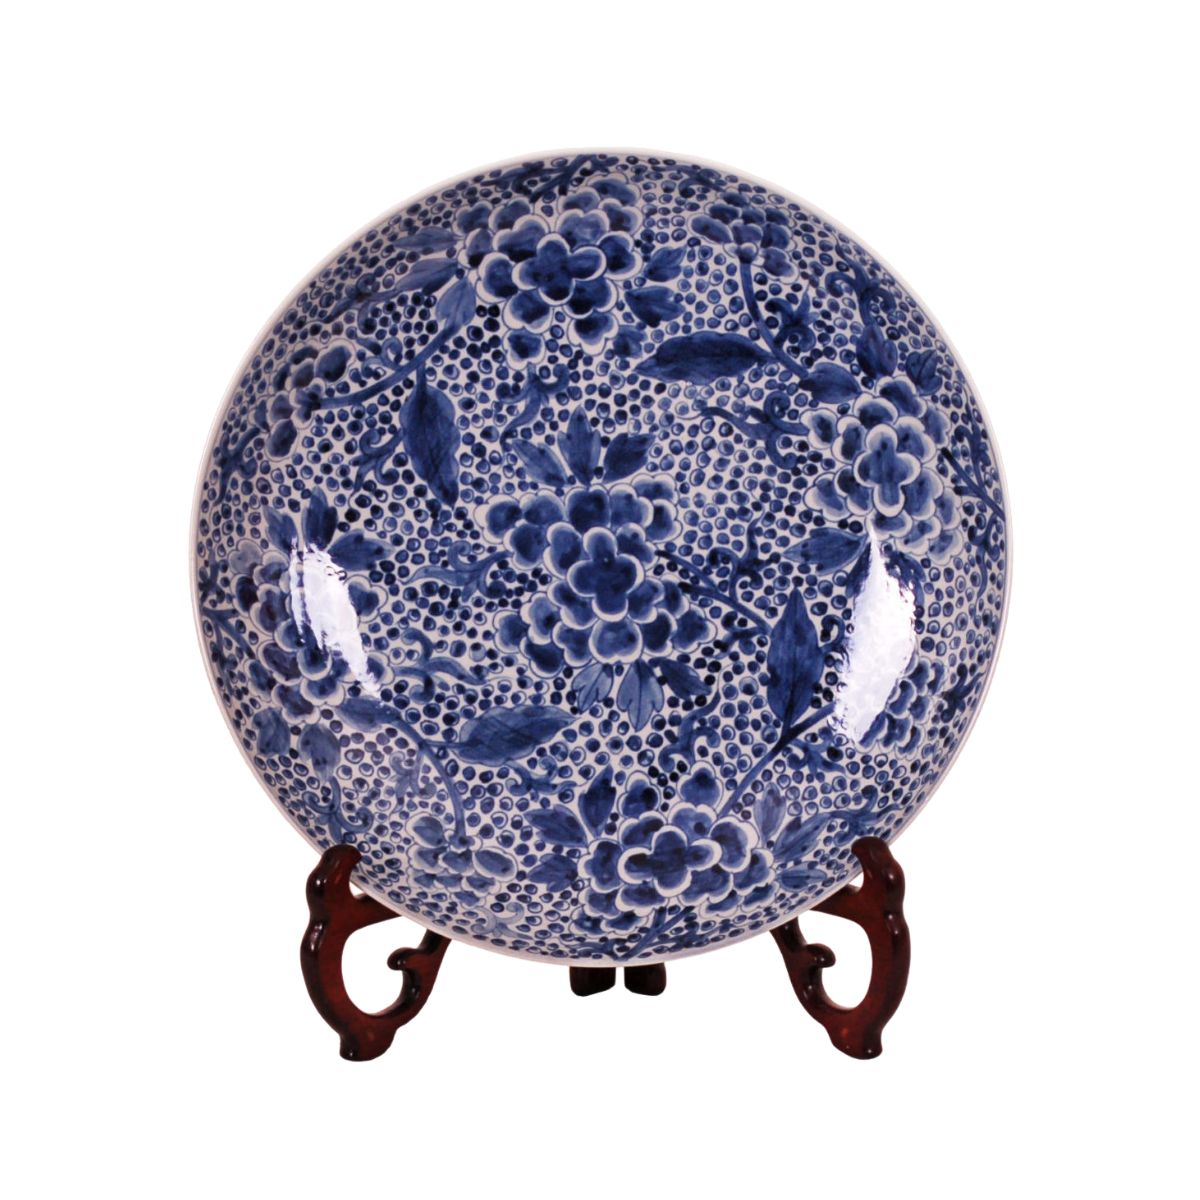 Blue and White Chinese Porcelain Charger, Flower Design